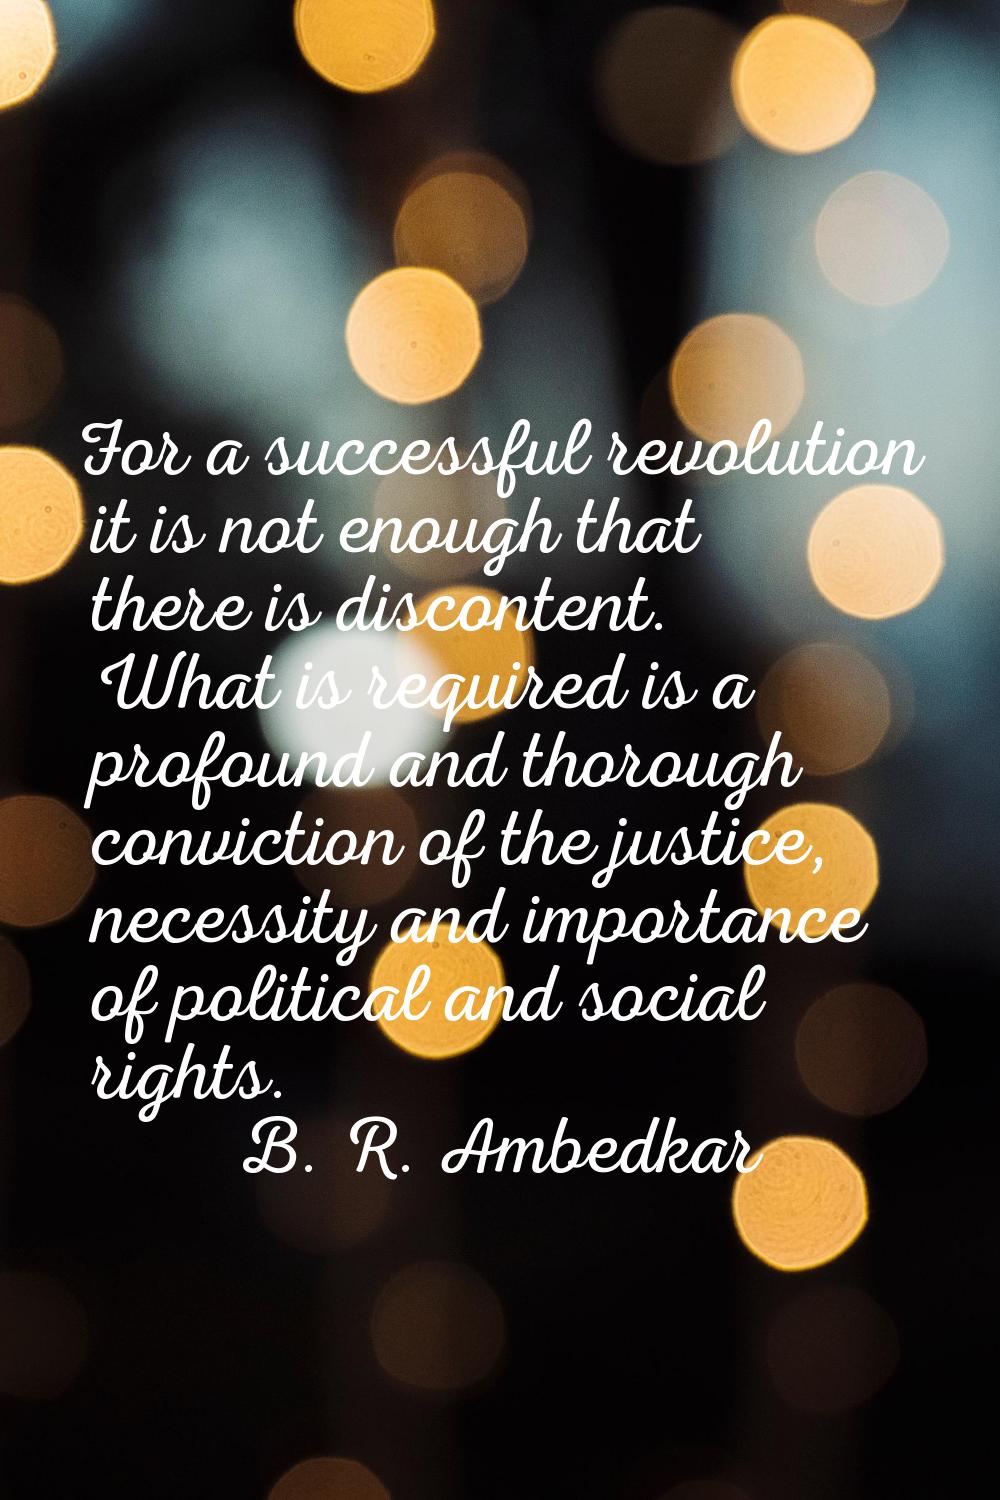 For a successful revolution it is not enough that there is discontent. What is required is a profou